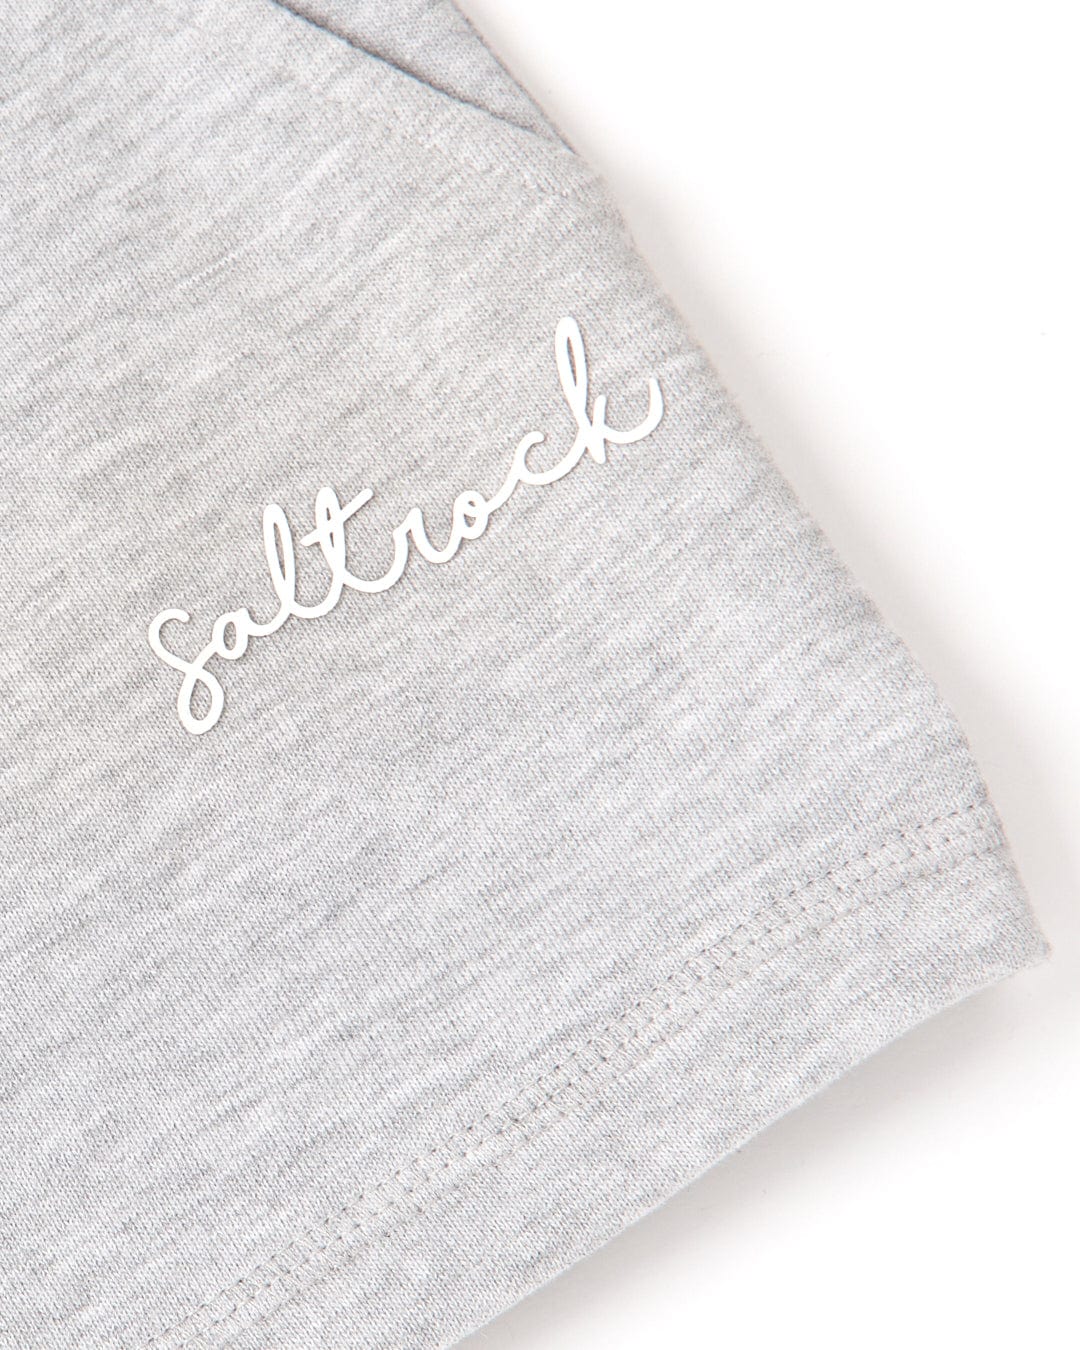 A grey t-shirt with the word "Velator - Womens Sweat Short - Grey" embroidered on it, made of soft jersey material and featuring Saltrock branding.